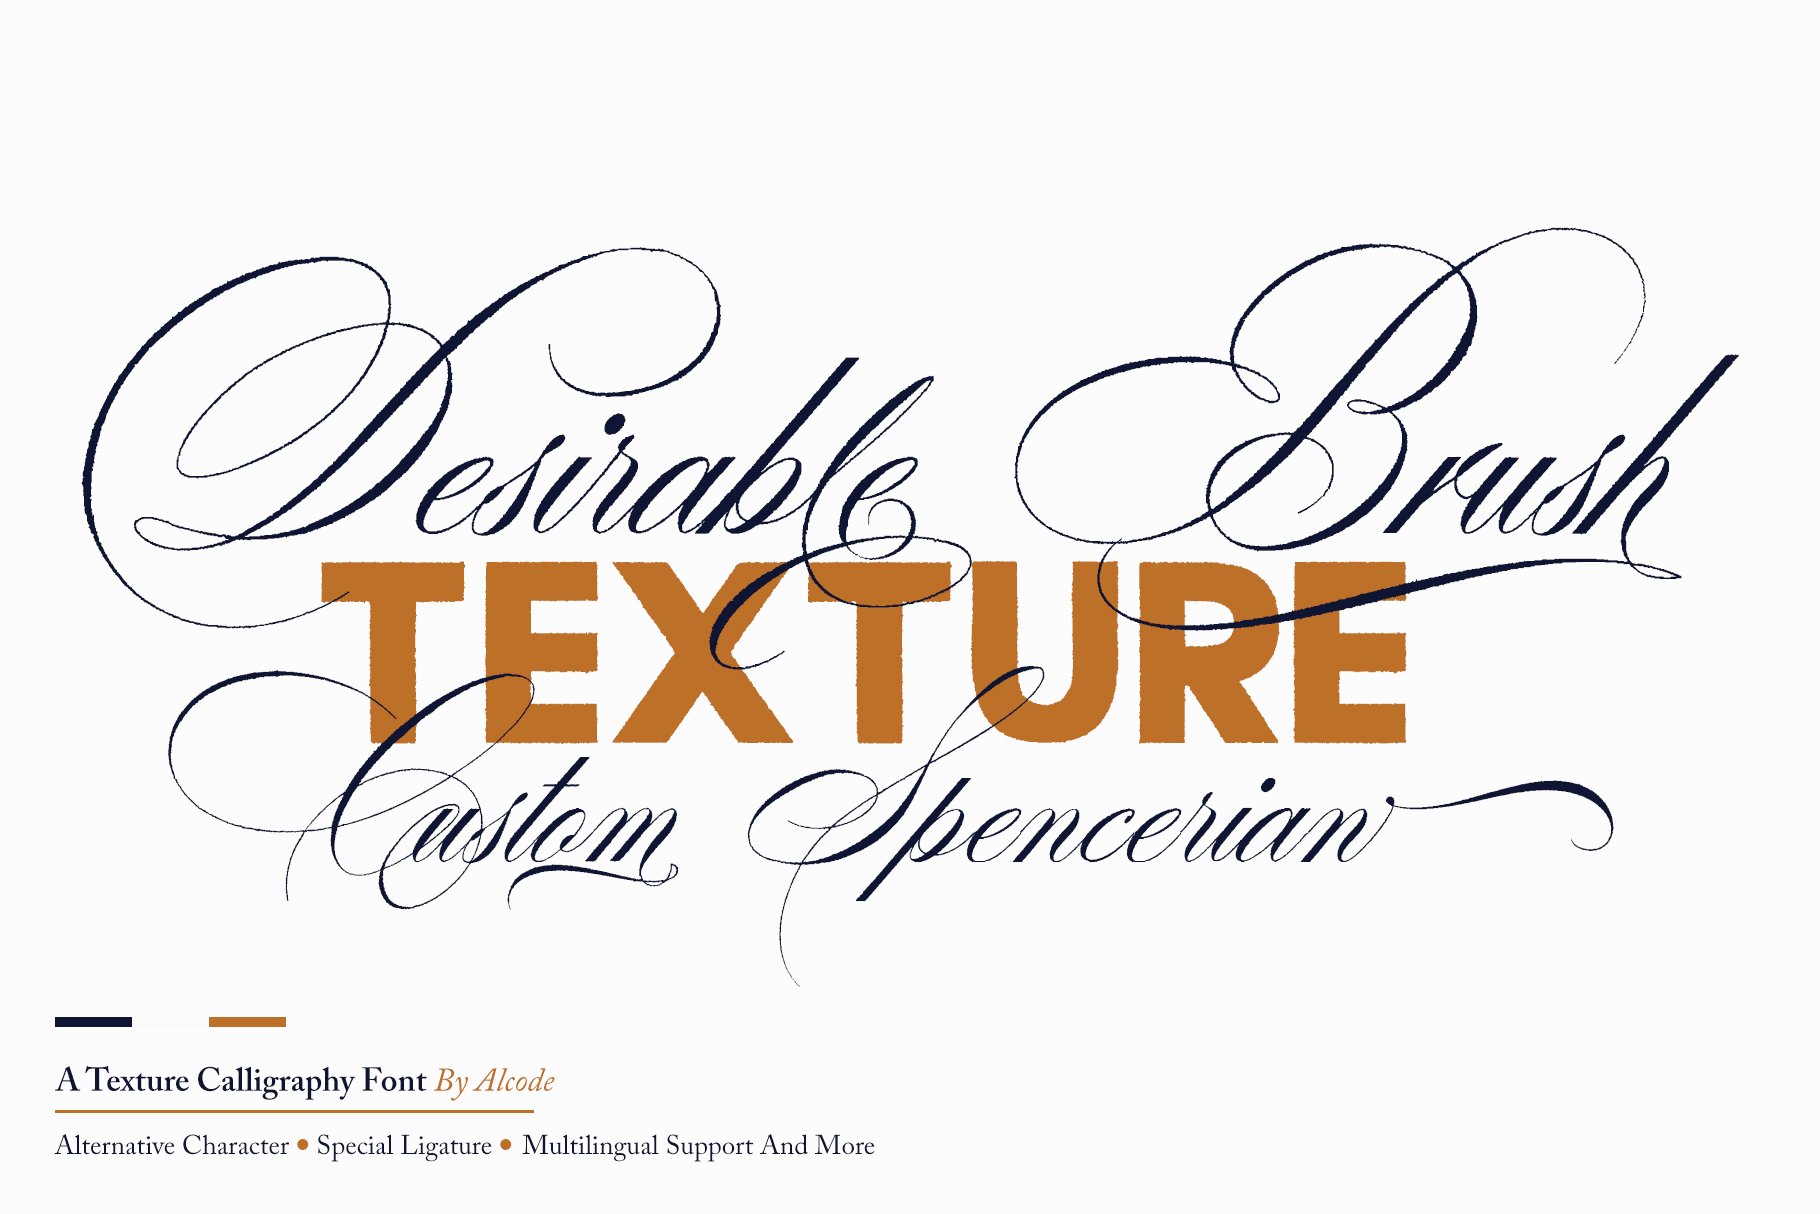 Desirable Brush Texture cover image.